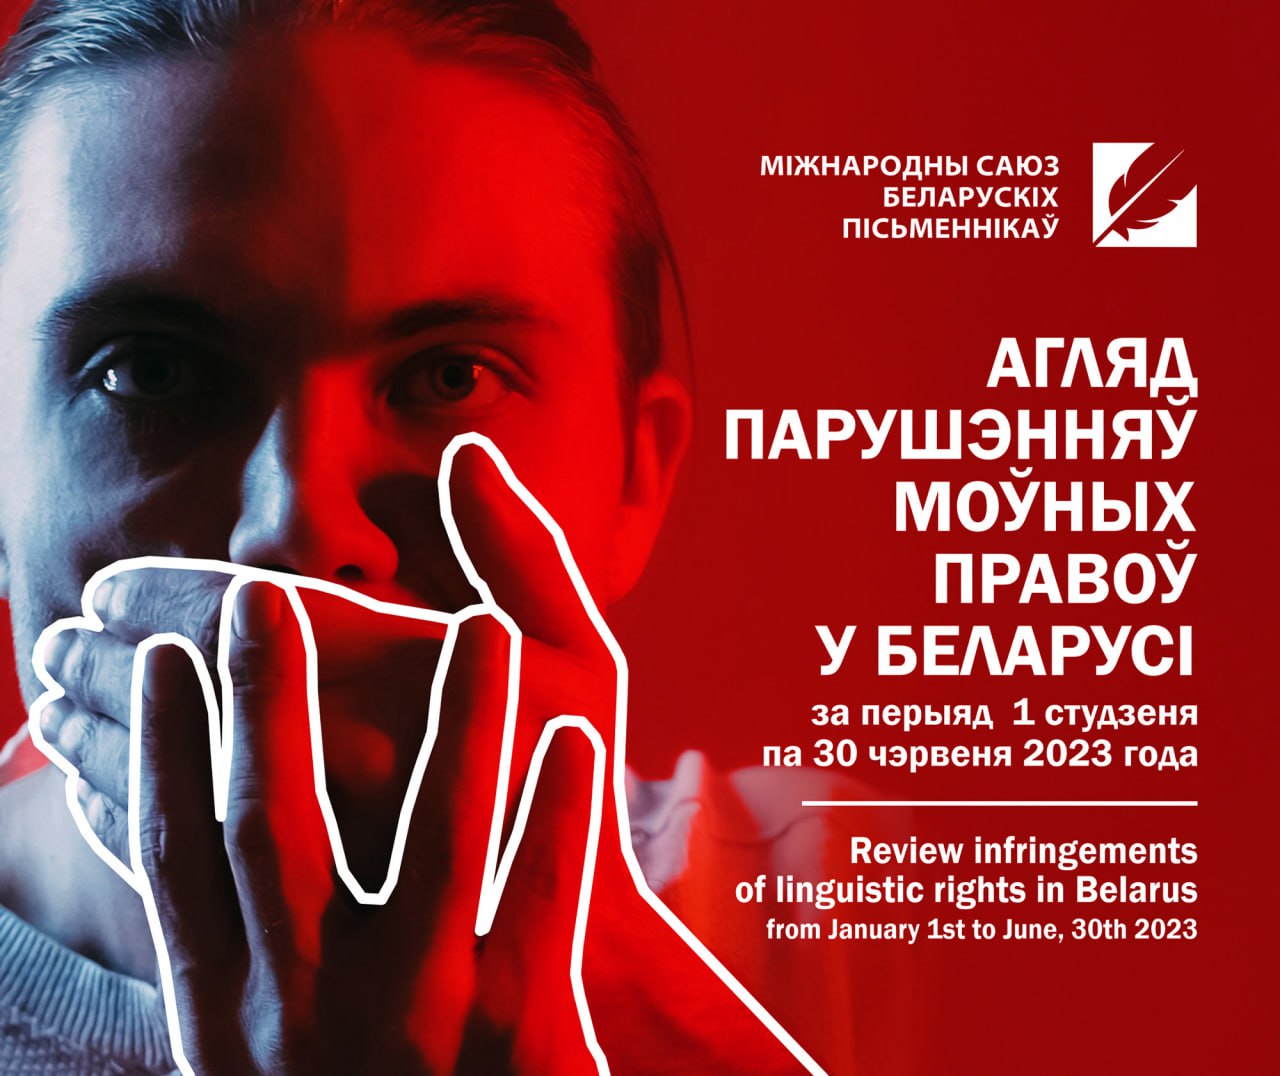 Survey of violations of language rights in Belarus from January 1st to June 30th 2023